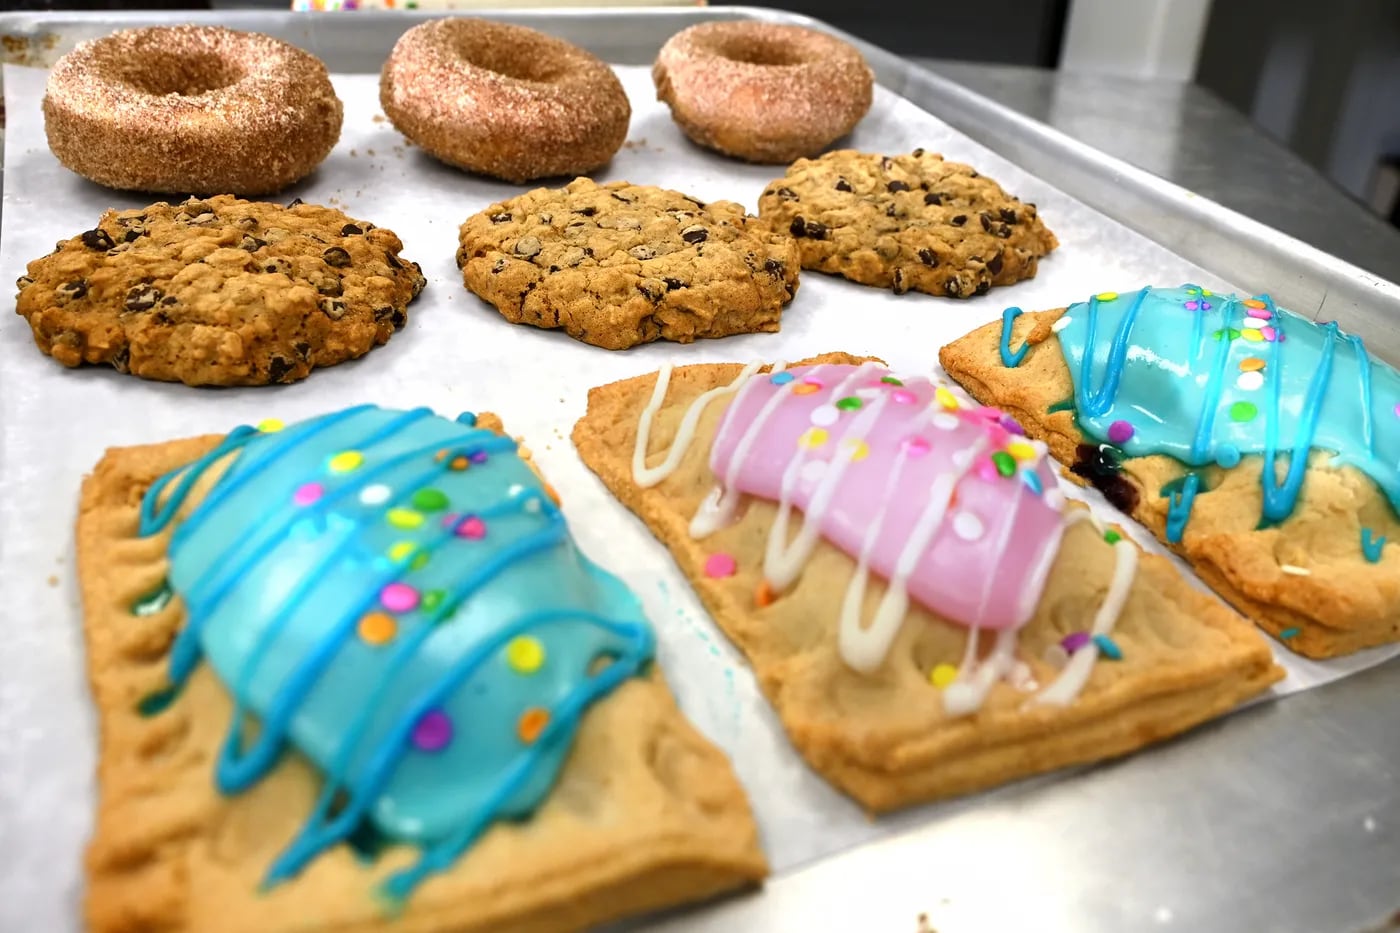 Baked goods at Kizbee’s Kitchen in Egg Harbor City. Everything Jenna Kisby makes and bakes is 100% gluten-free, with many vegan and soy-free options as well. 